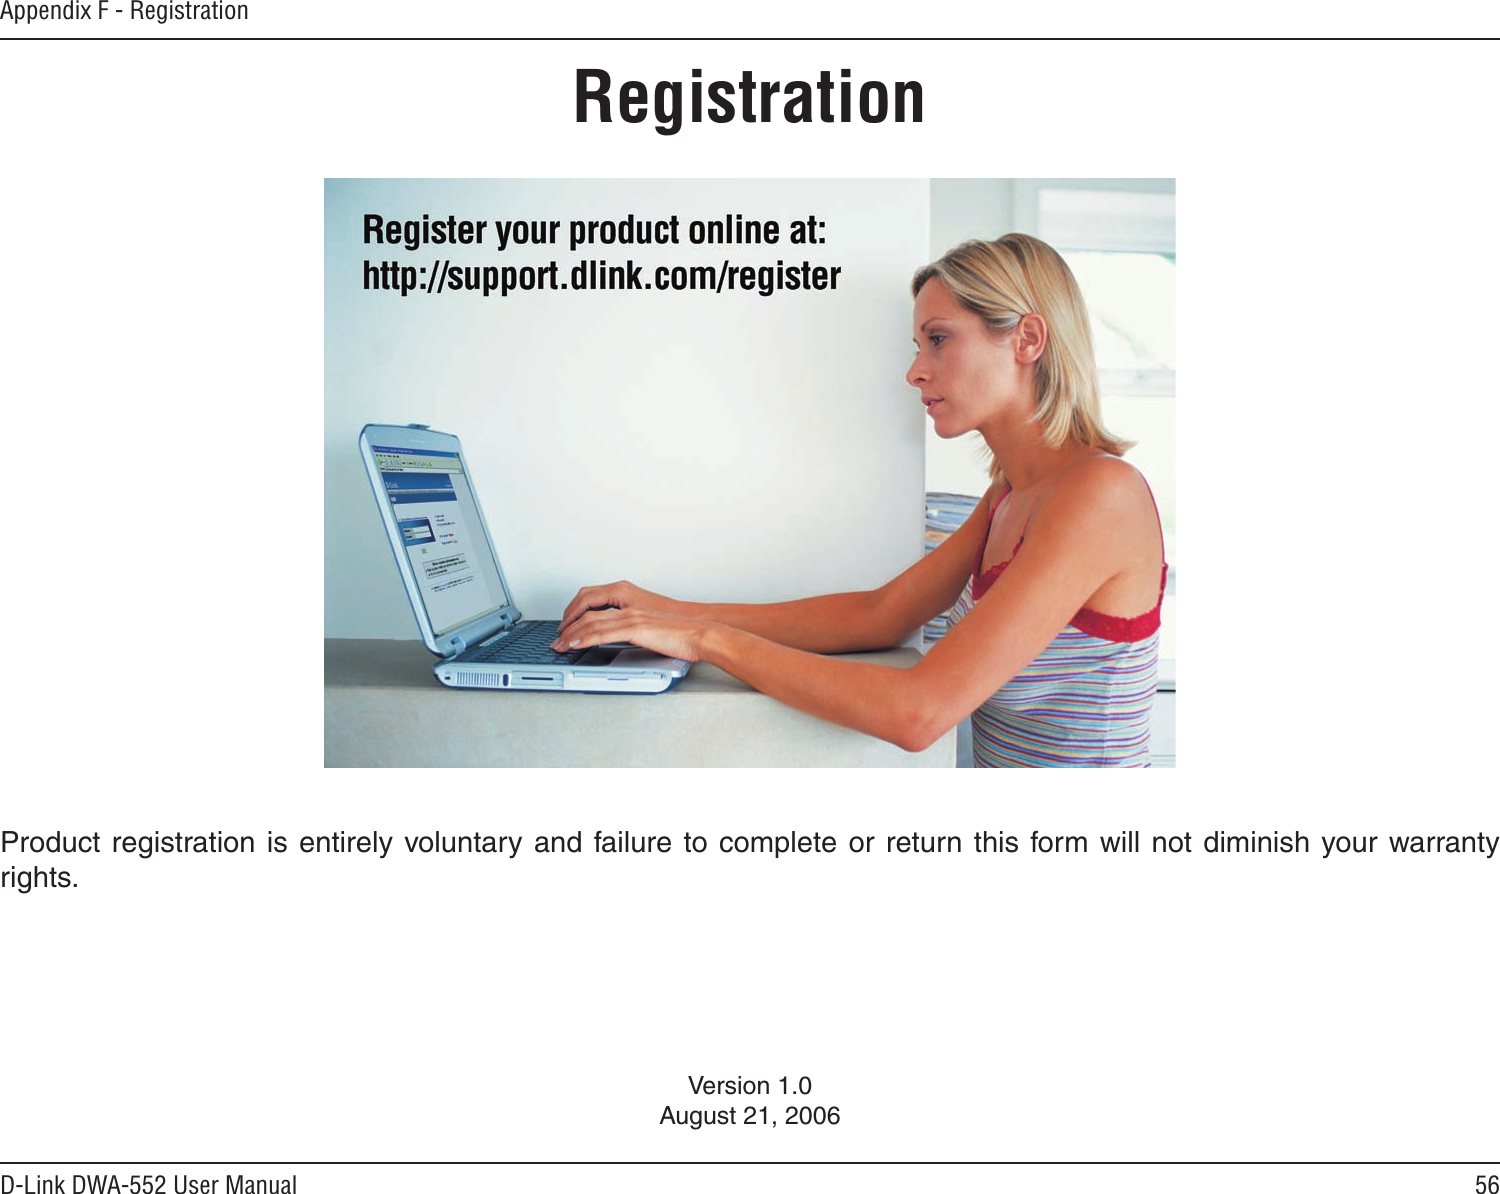 56D-Link DWA-552 User ManualAppendix F - RegistrationVersion 1.0August 21, 2006Product registration is entirely voluntary  and failure to complete  or return this form will  not diminish your warranty rights.Registration